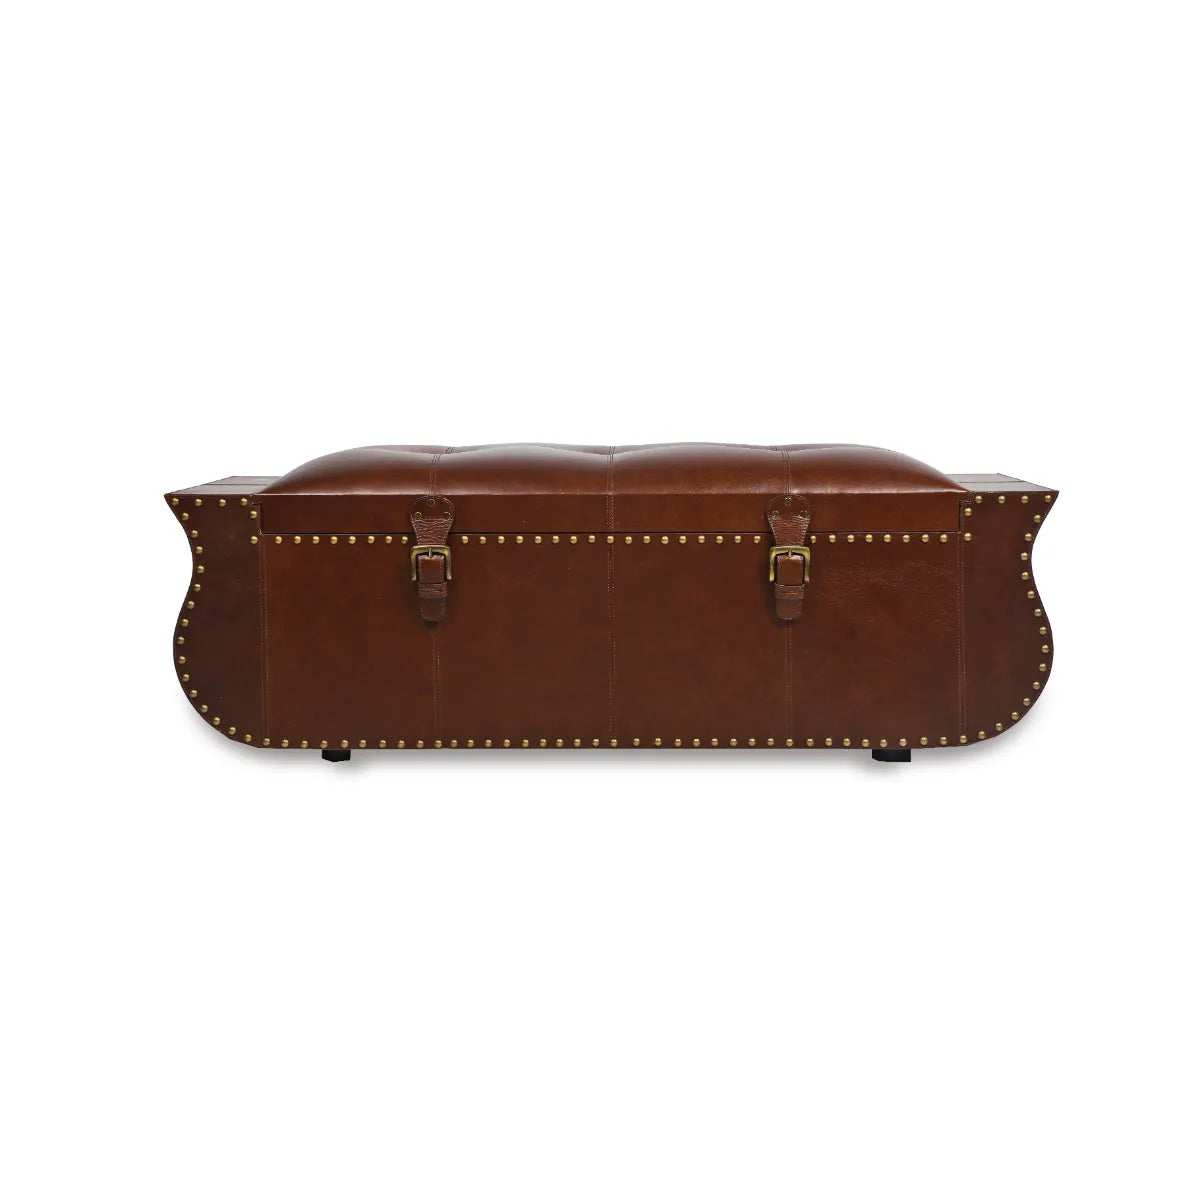 Genuine Leather Ottoman With Storage In Brown Colour